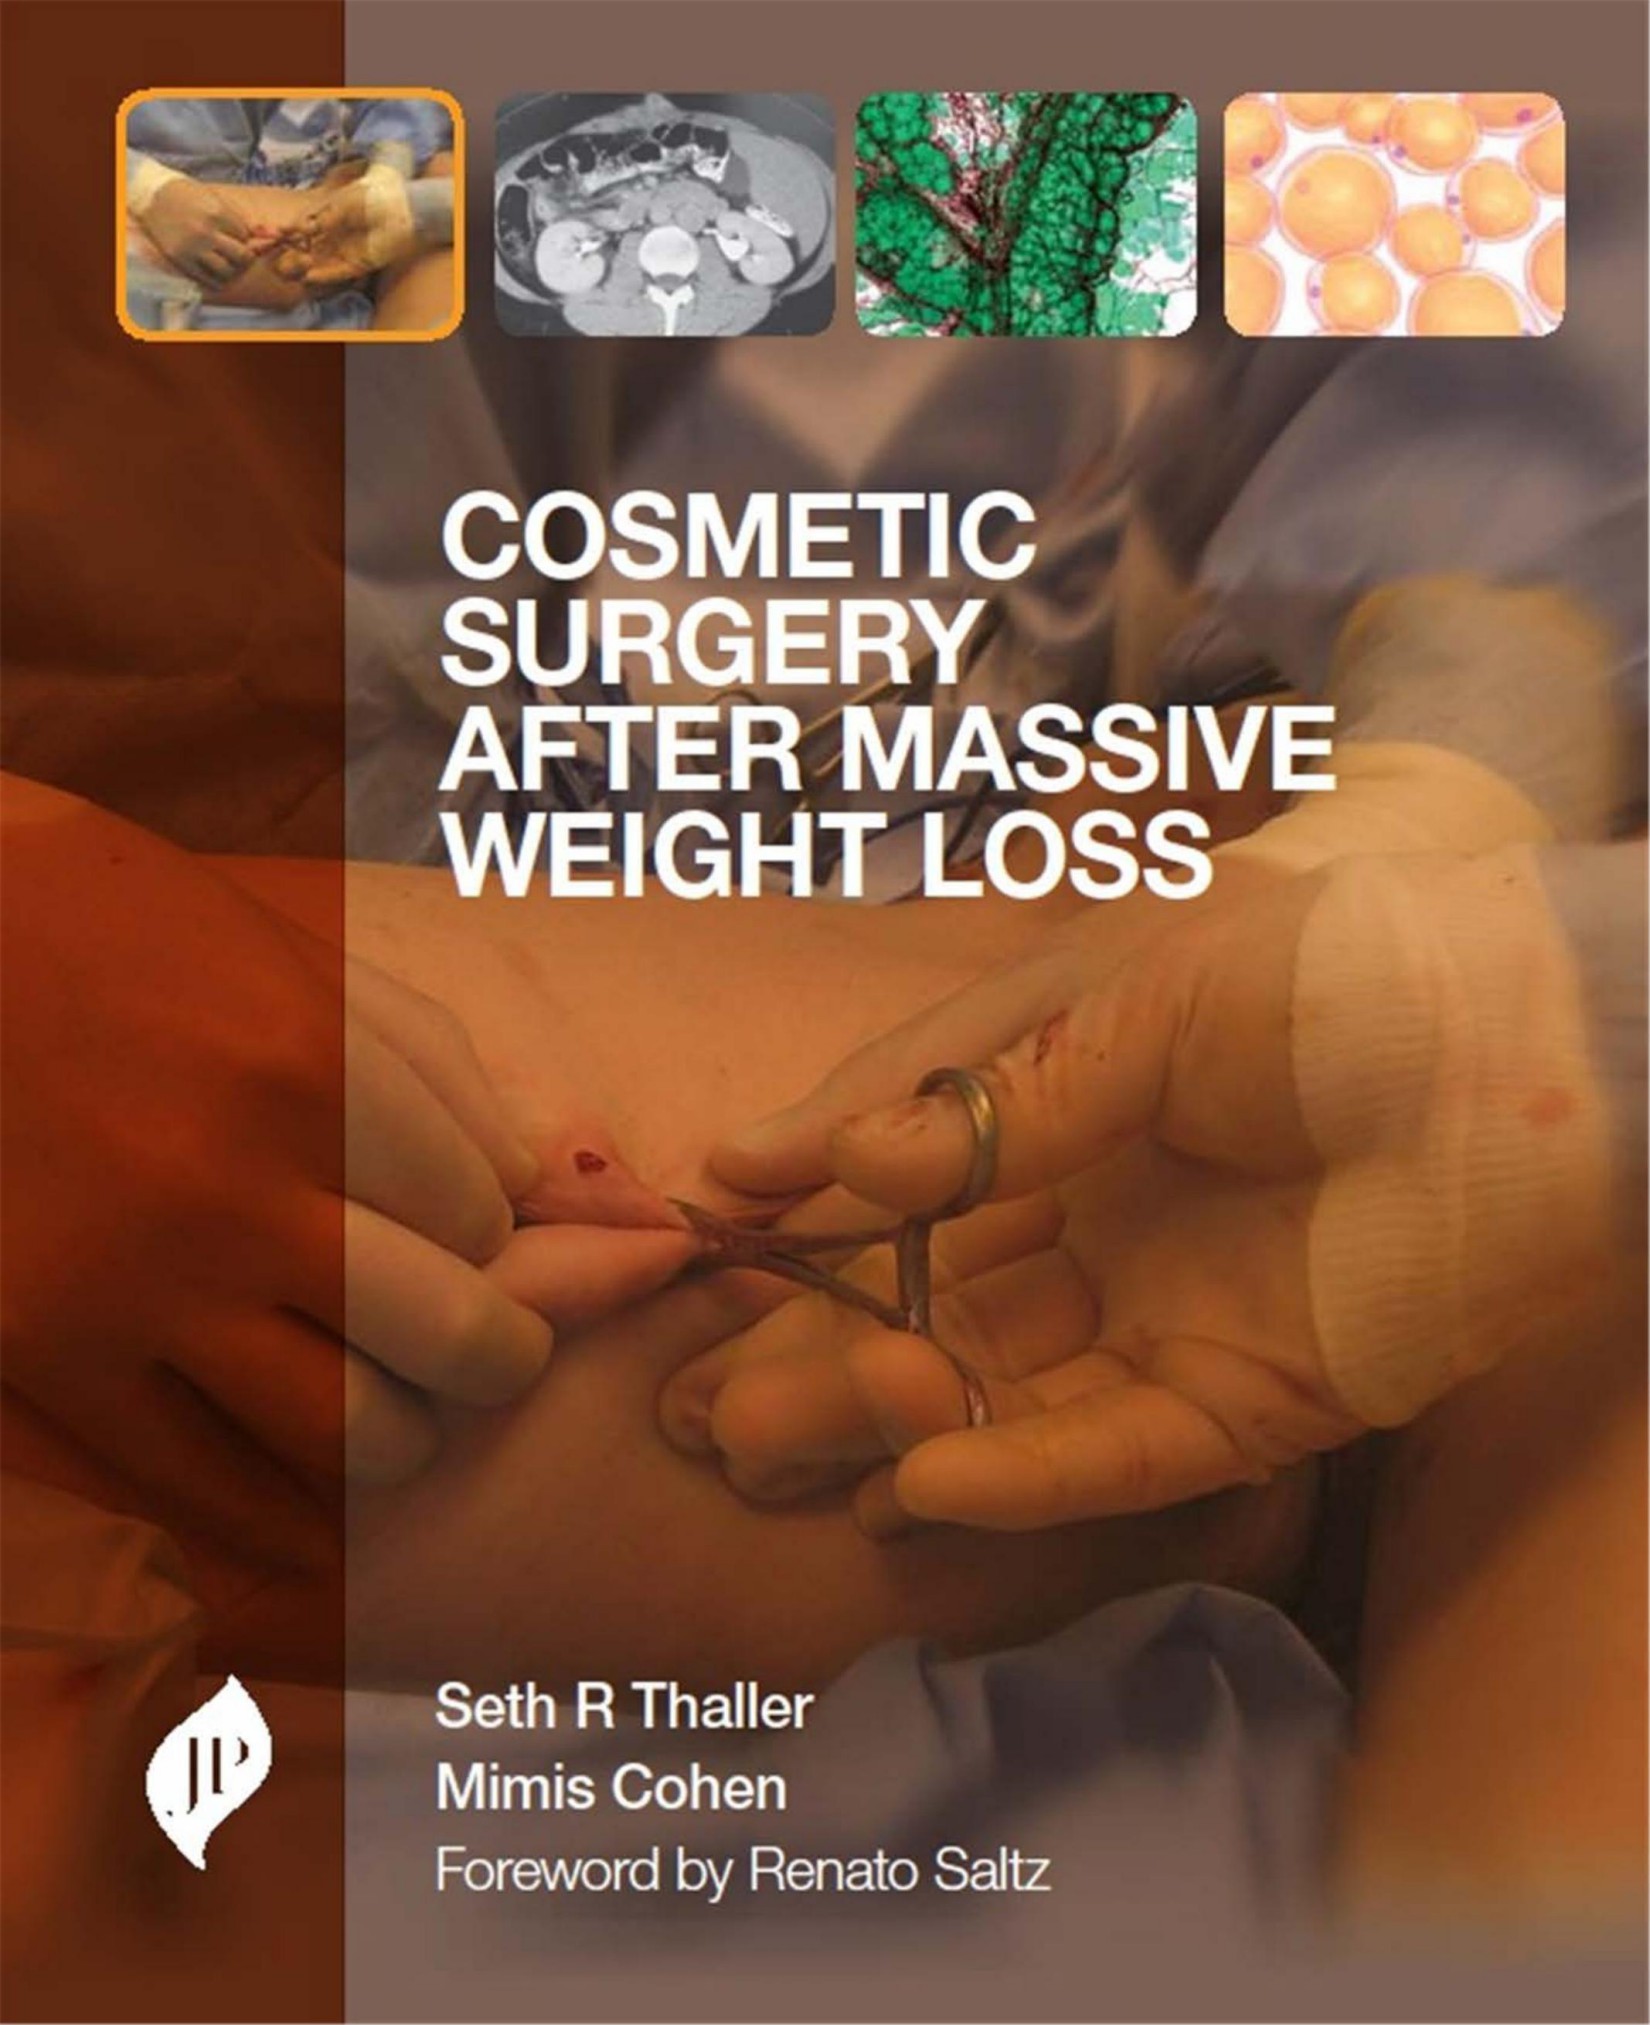 Cosmetic Surgery After Massive Weight Loss.jpg